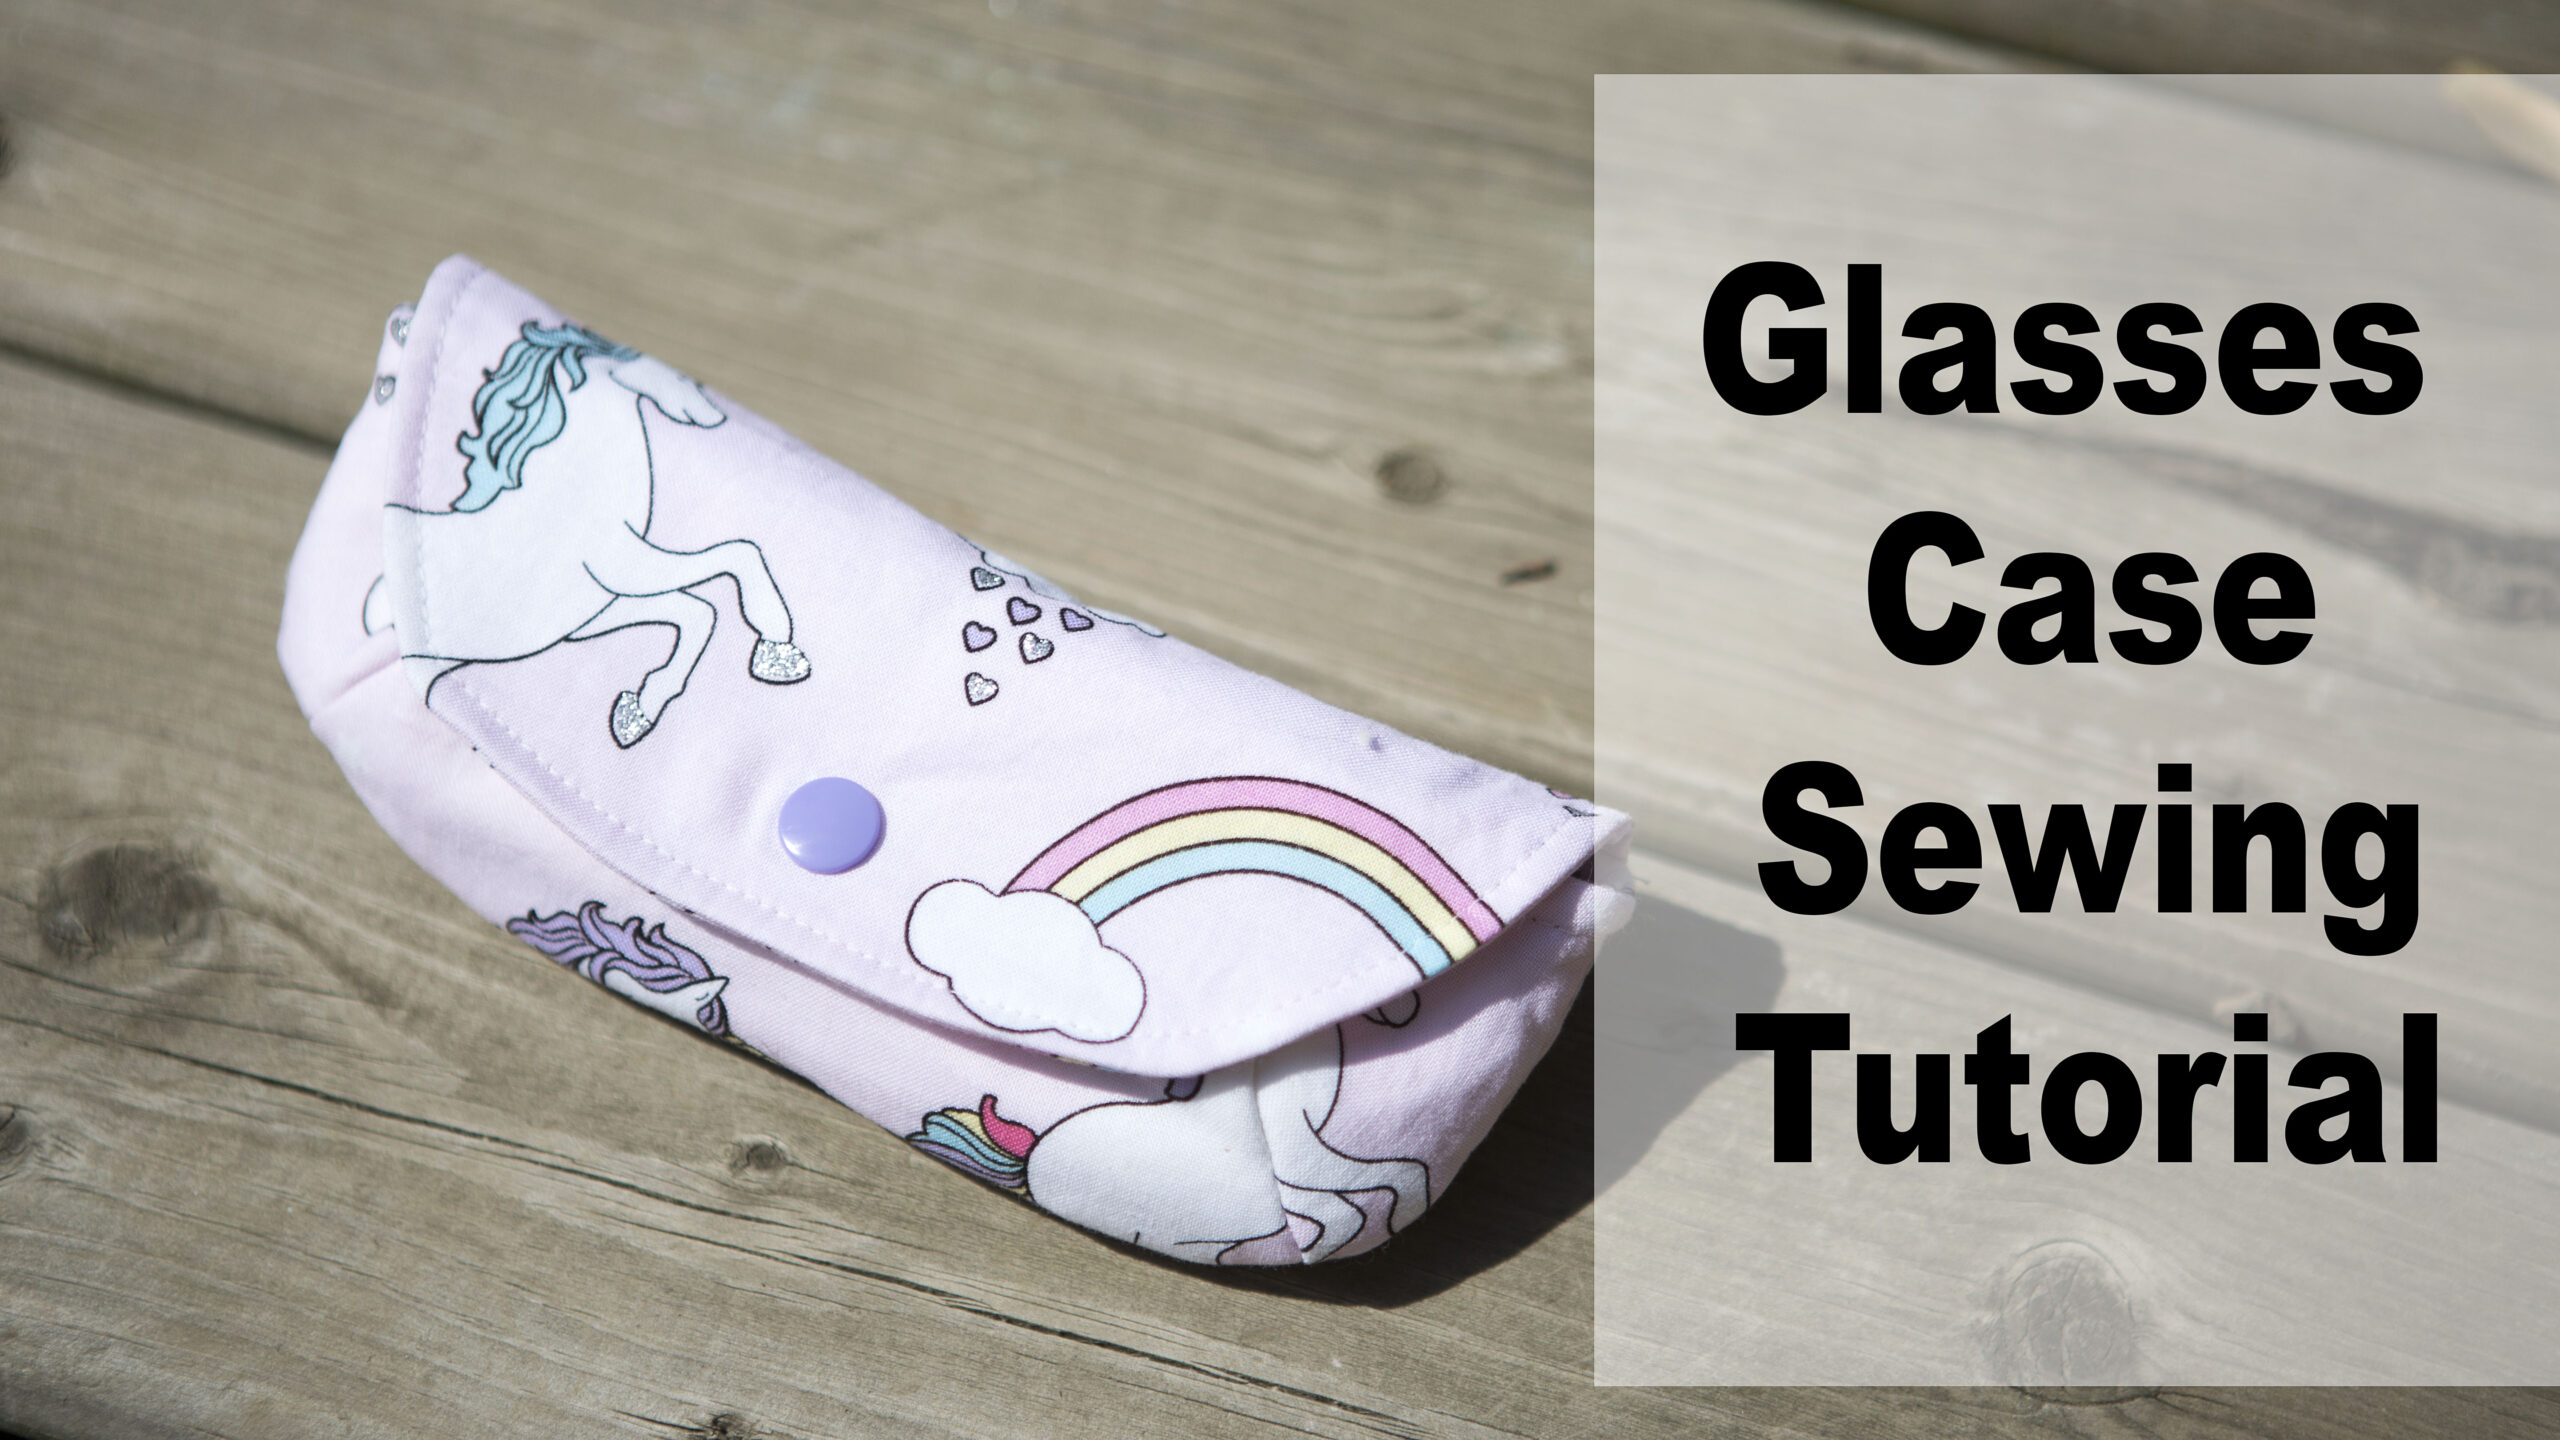 Glasses Case Sewing Tutorial